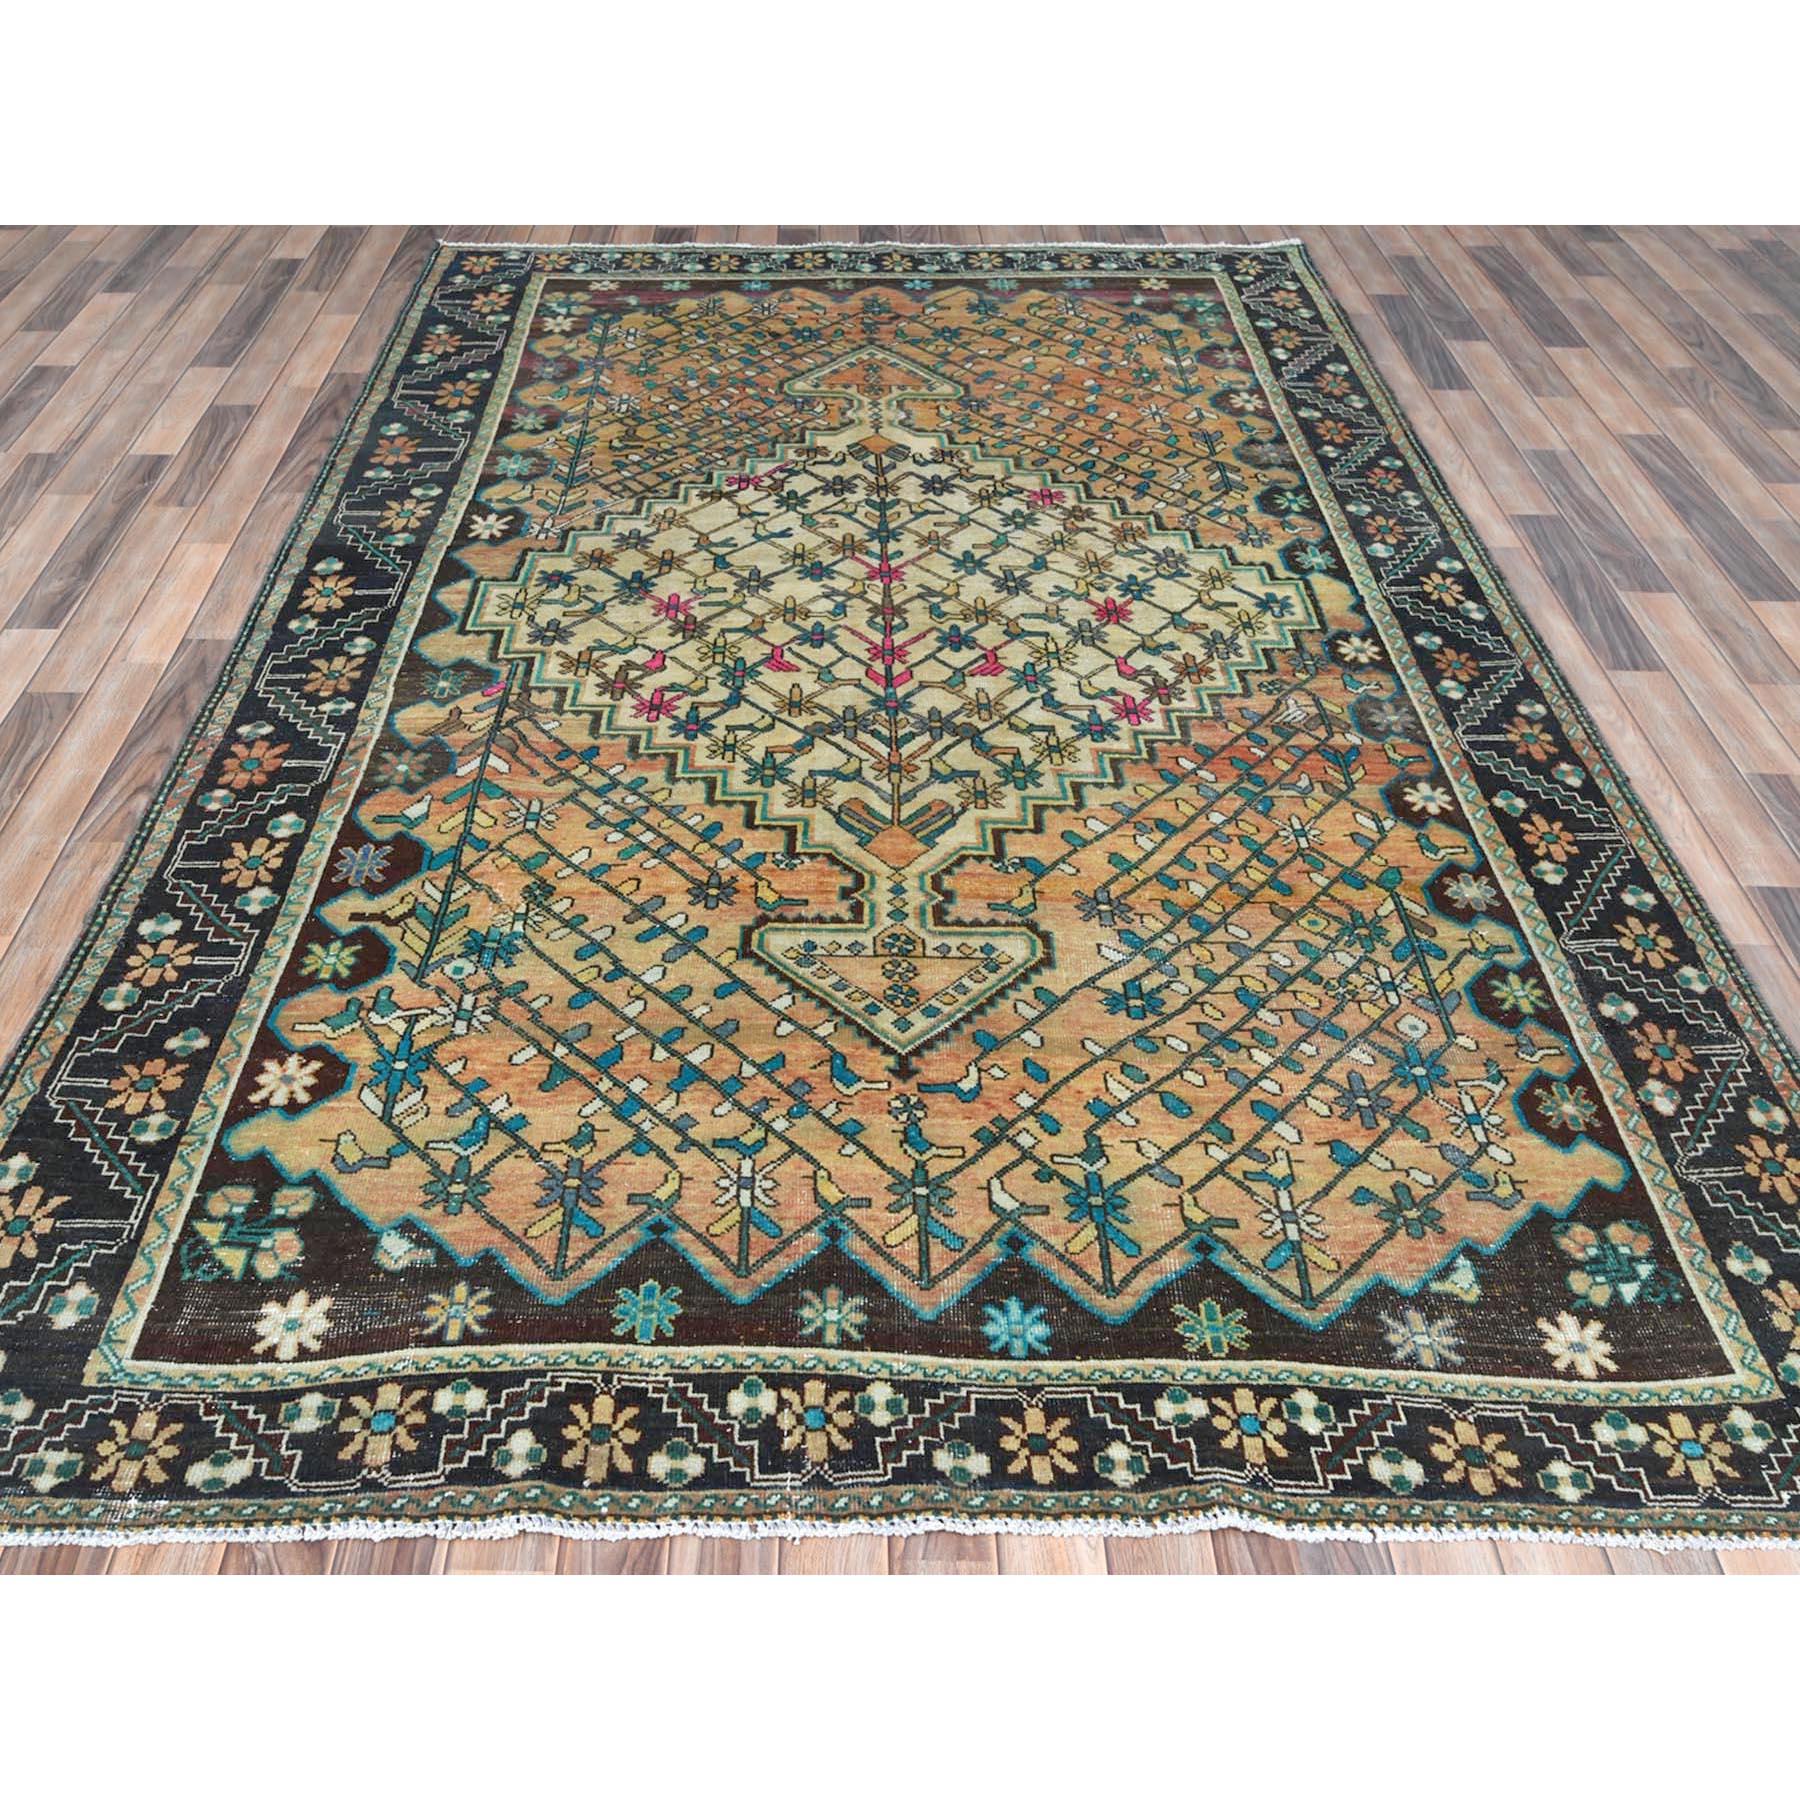 Medieval Sunset Color, Distressed Worn Wool Hand Knotted, Vintage Northwest Persian Rug